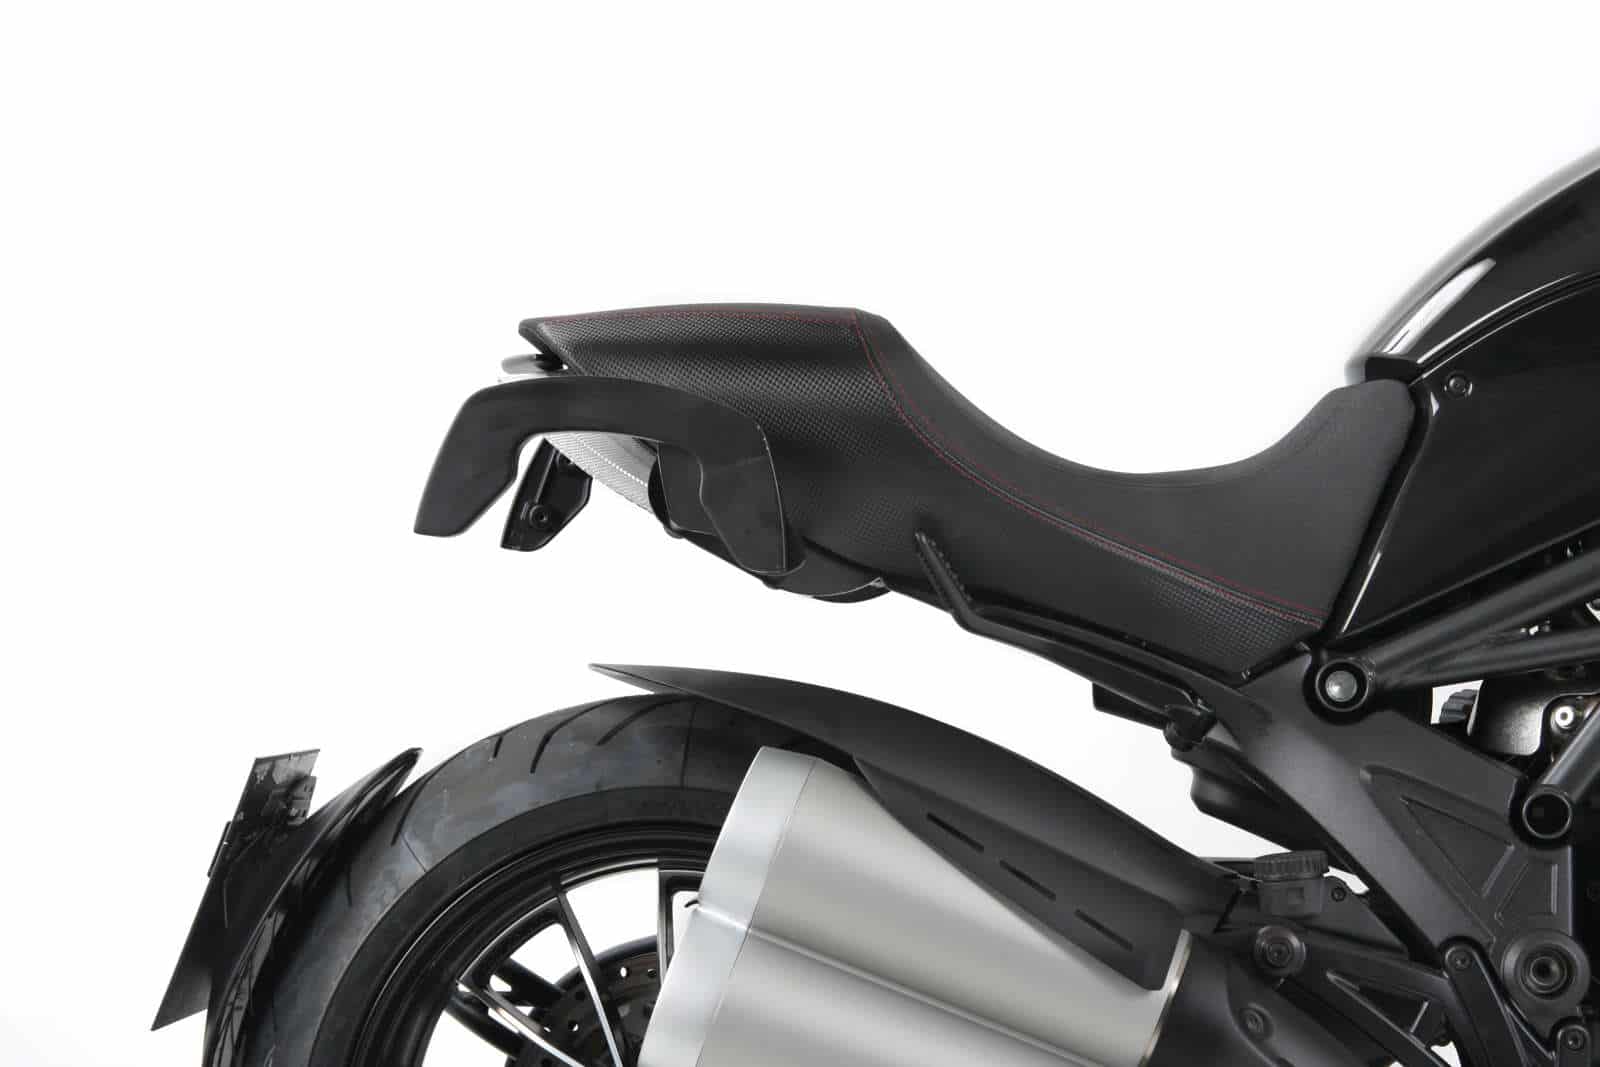 C-Bow sidecarrier for Ducati Diavel (2011-2018)